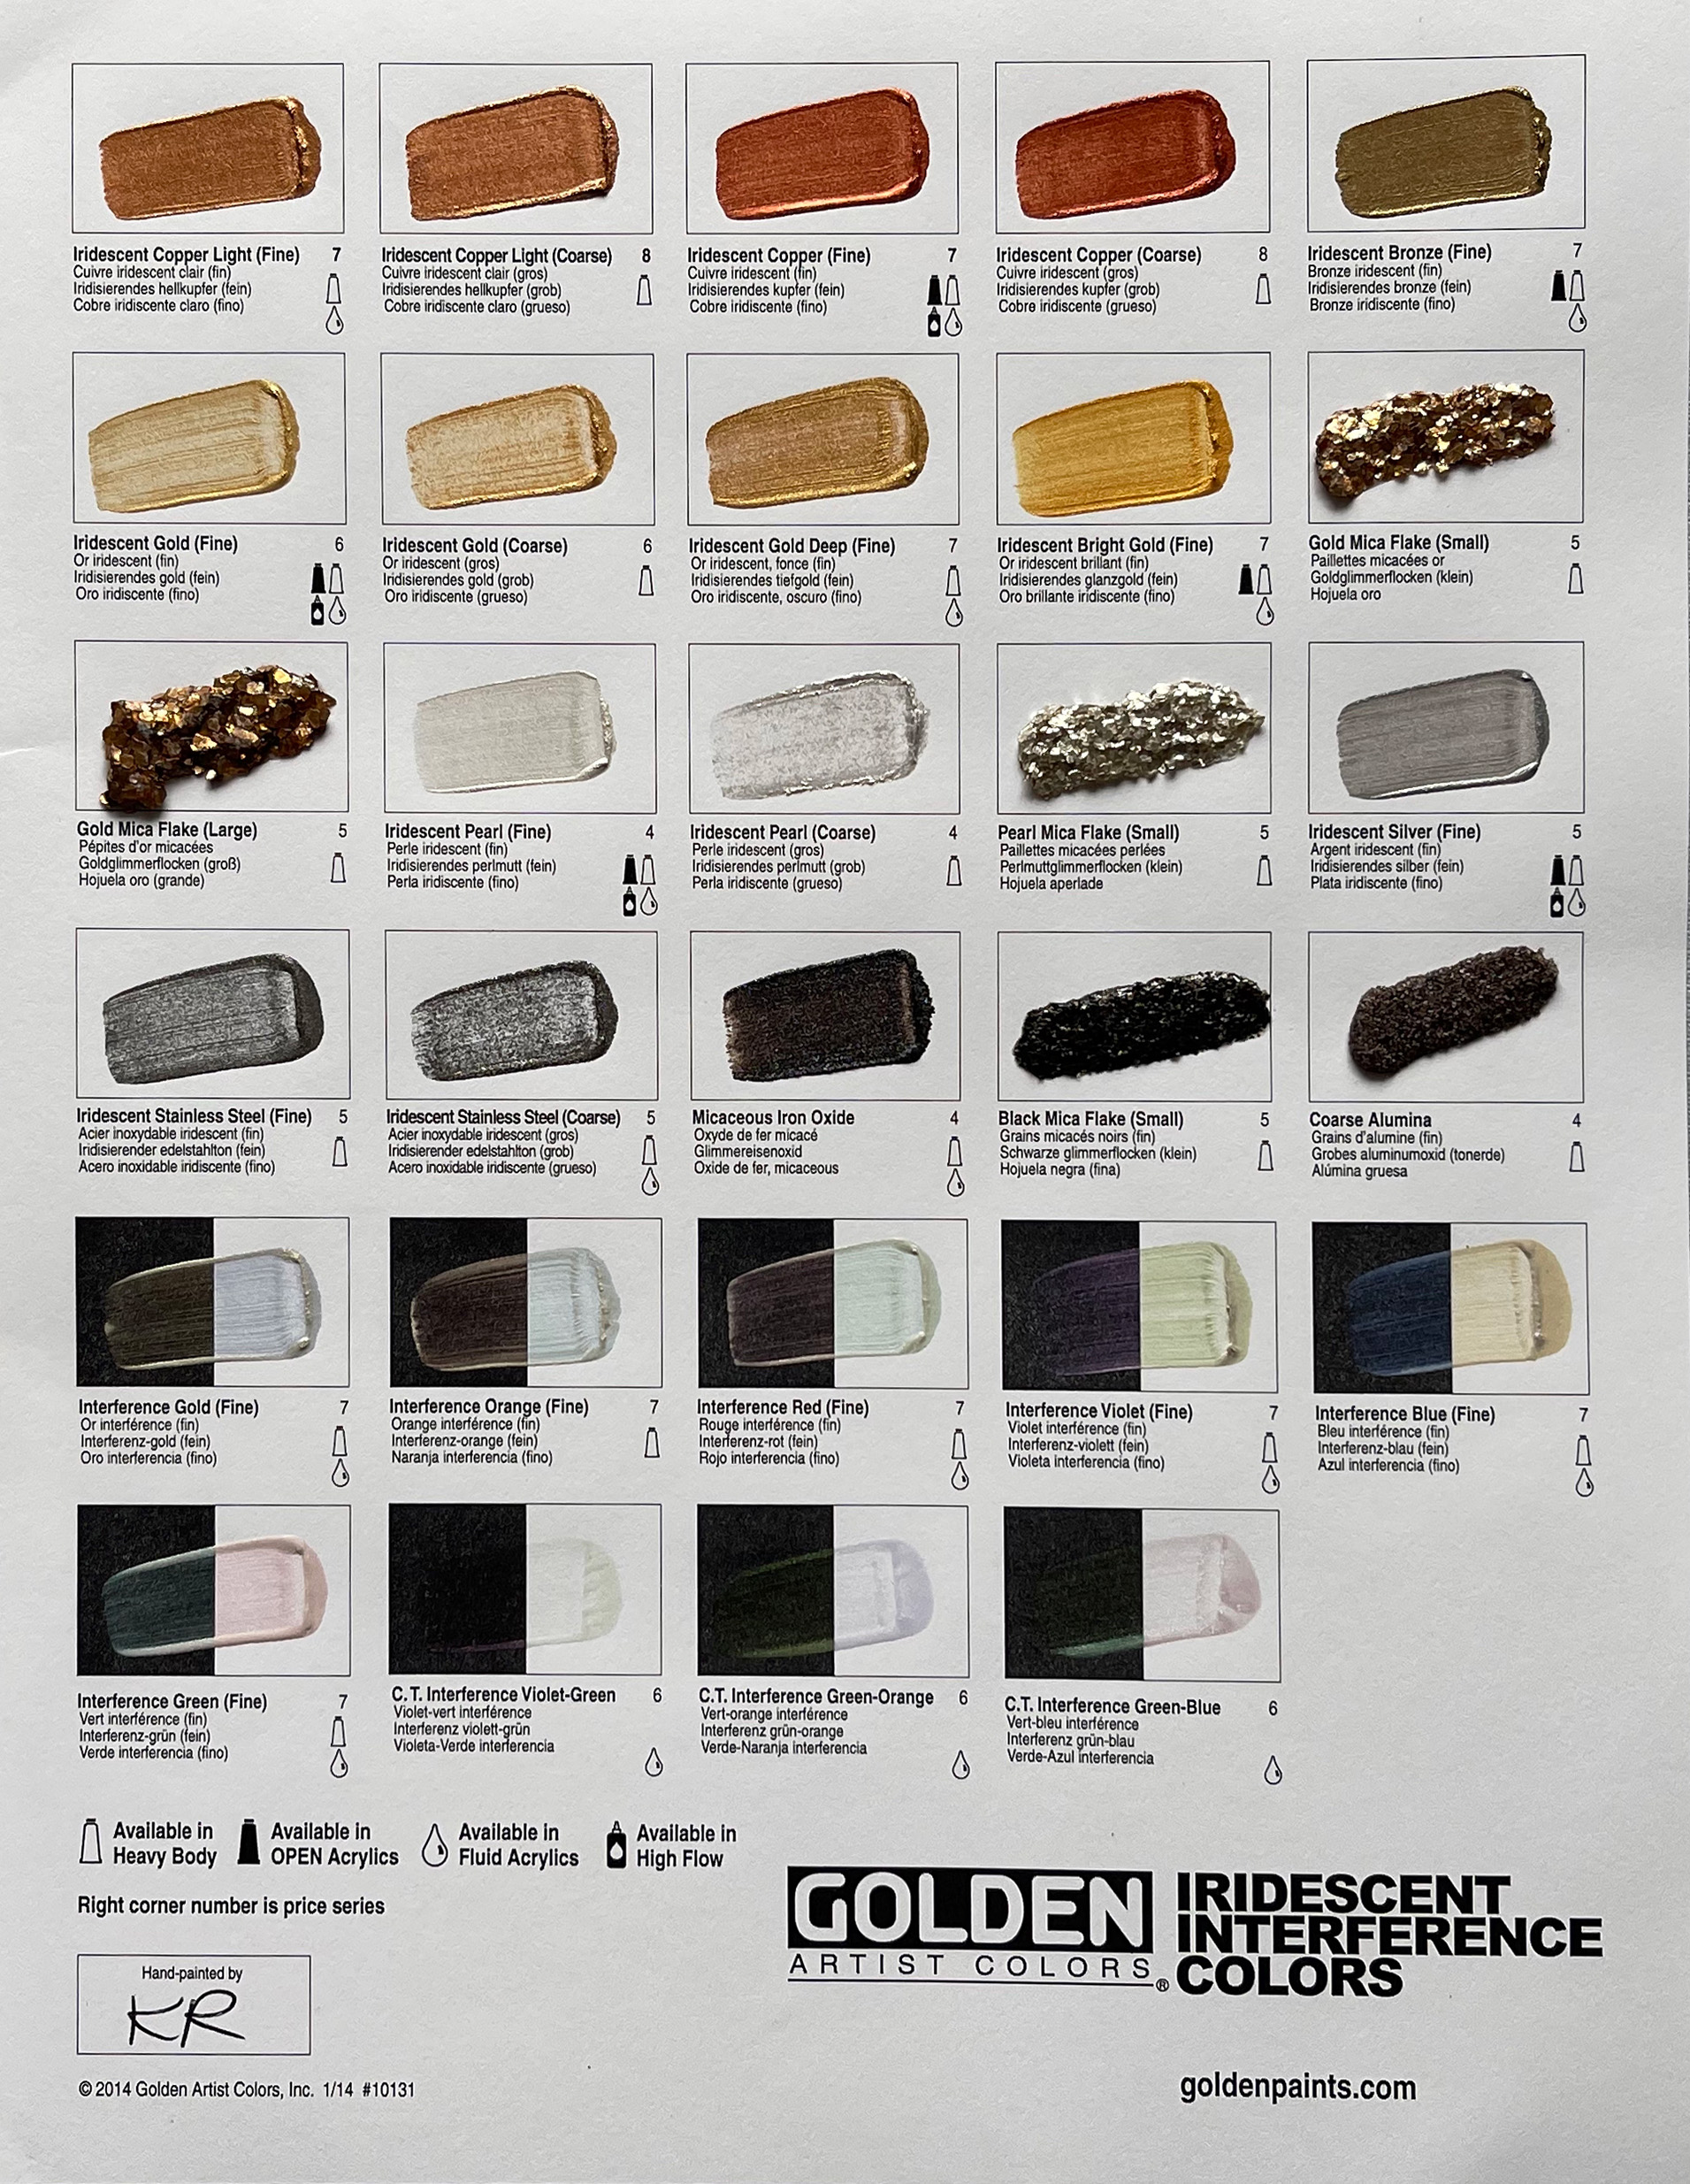 Golden Heavy Body Chart, Iridescent Interference Colors